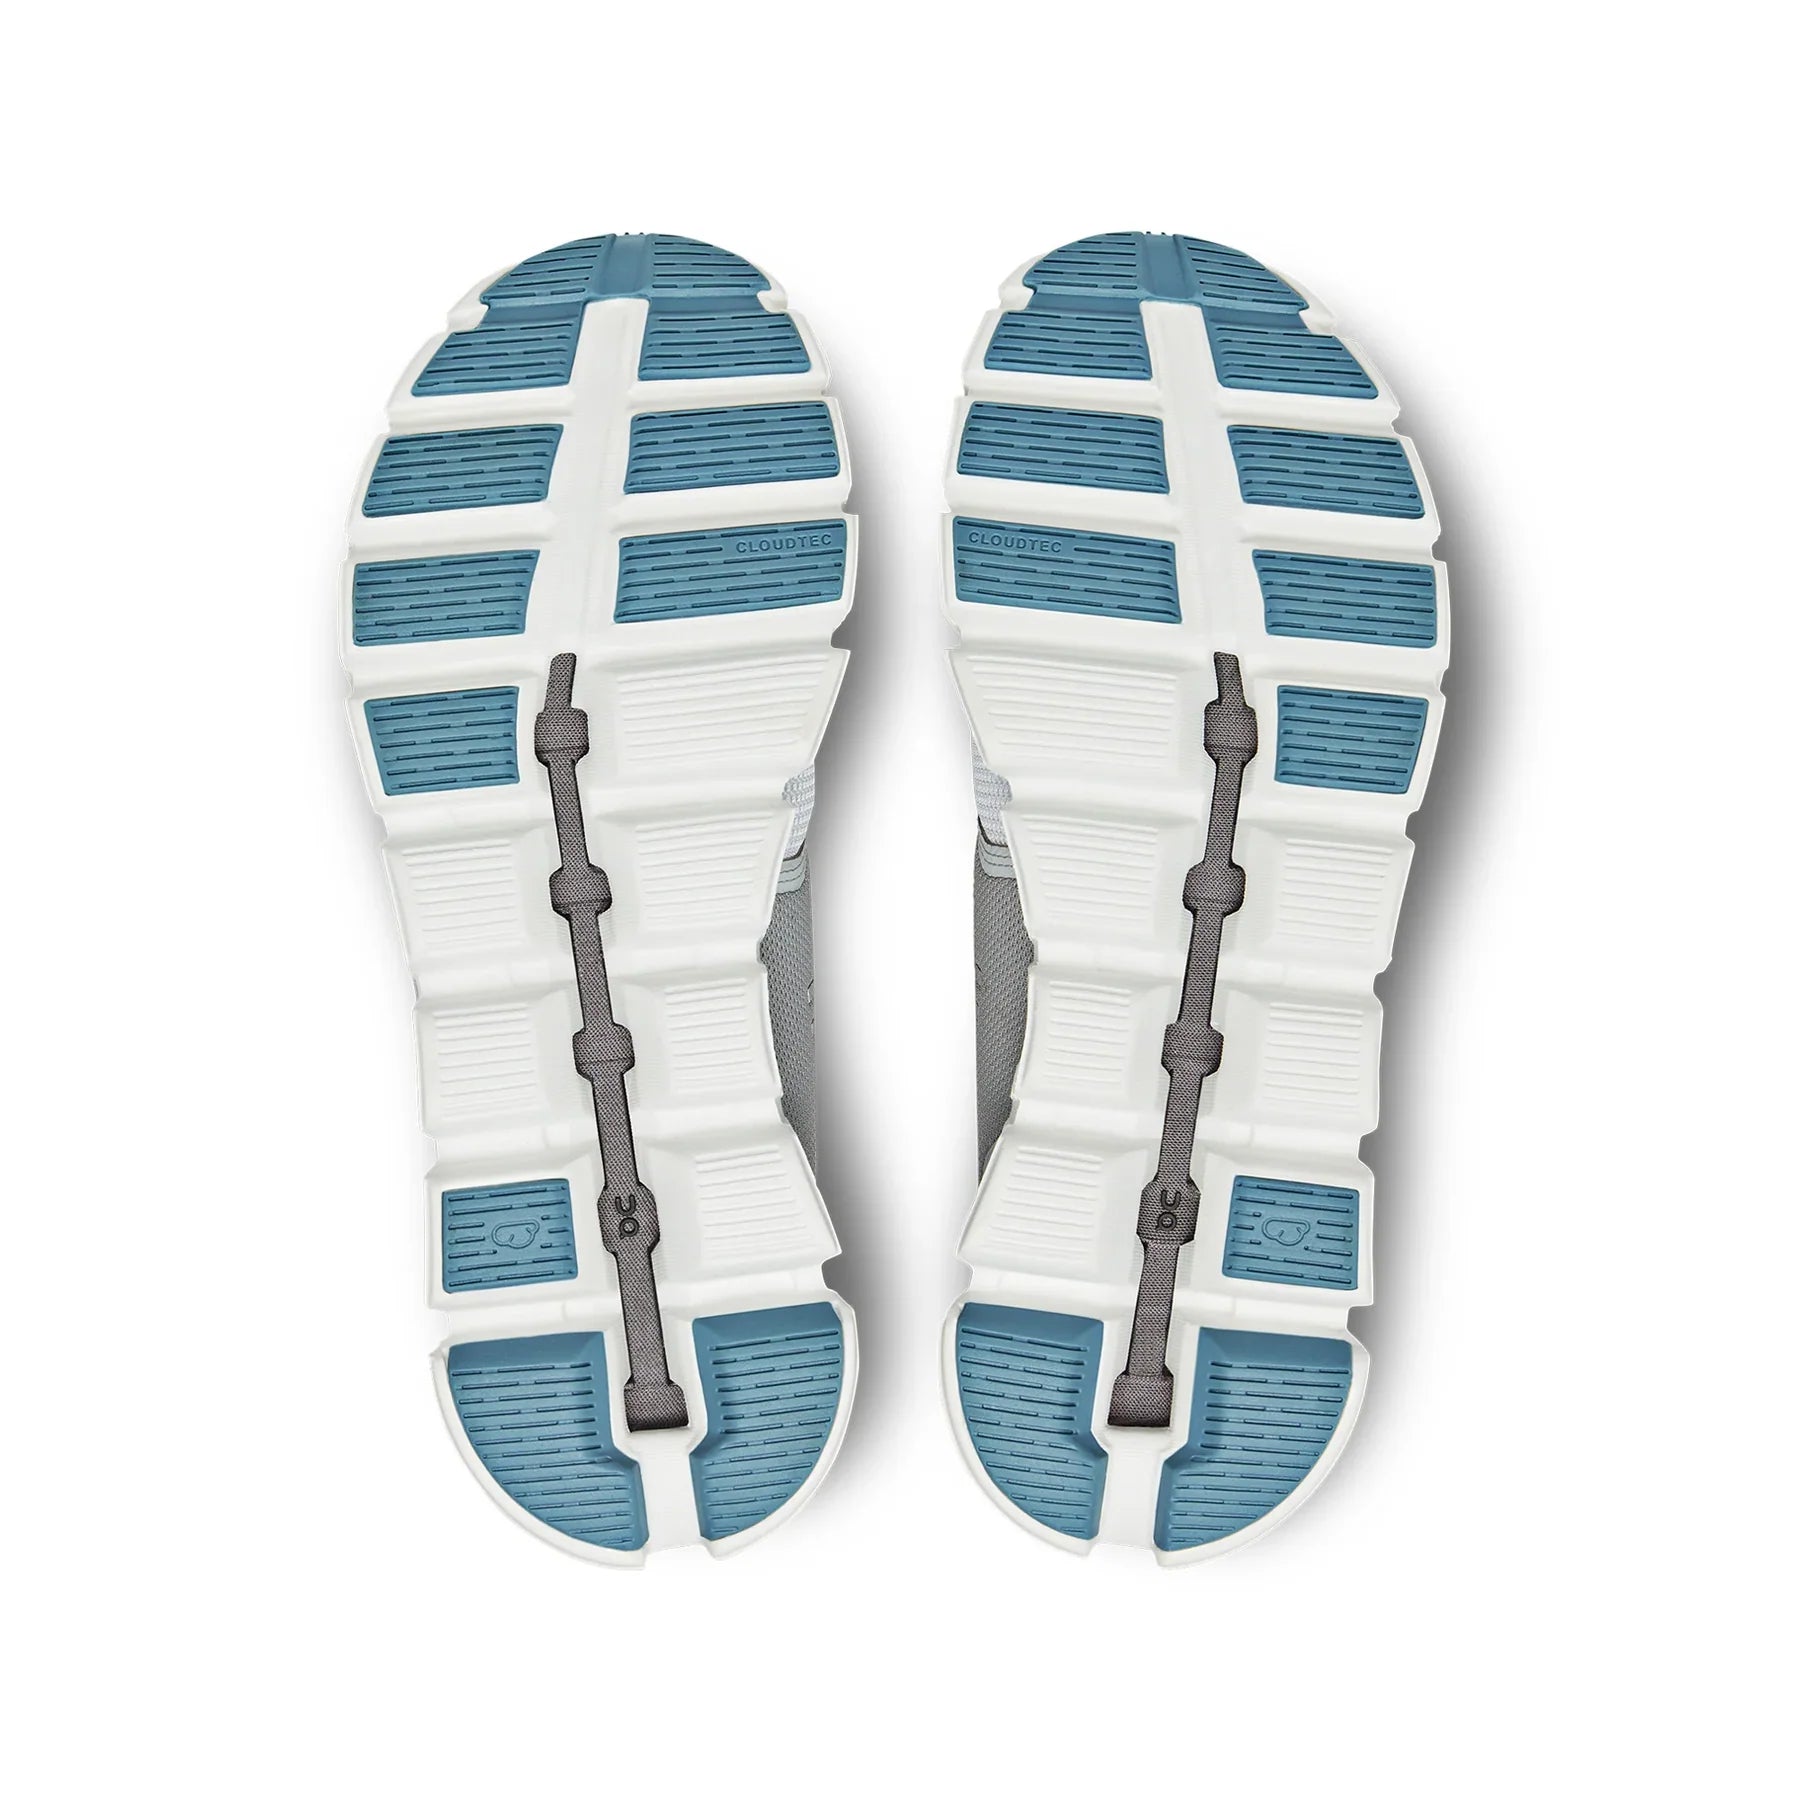 Bottom (outer sole) view of the pair of Women's ON Cloud 5 Push shoes in the color Glacier/Undyed White